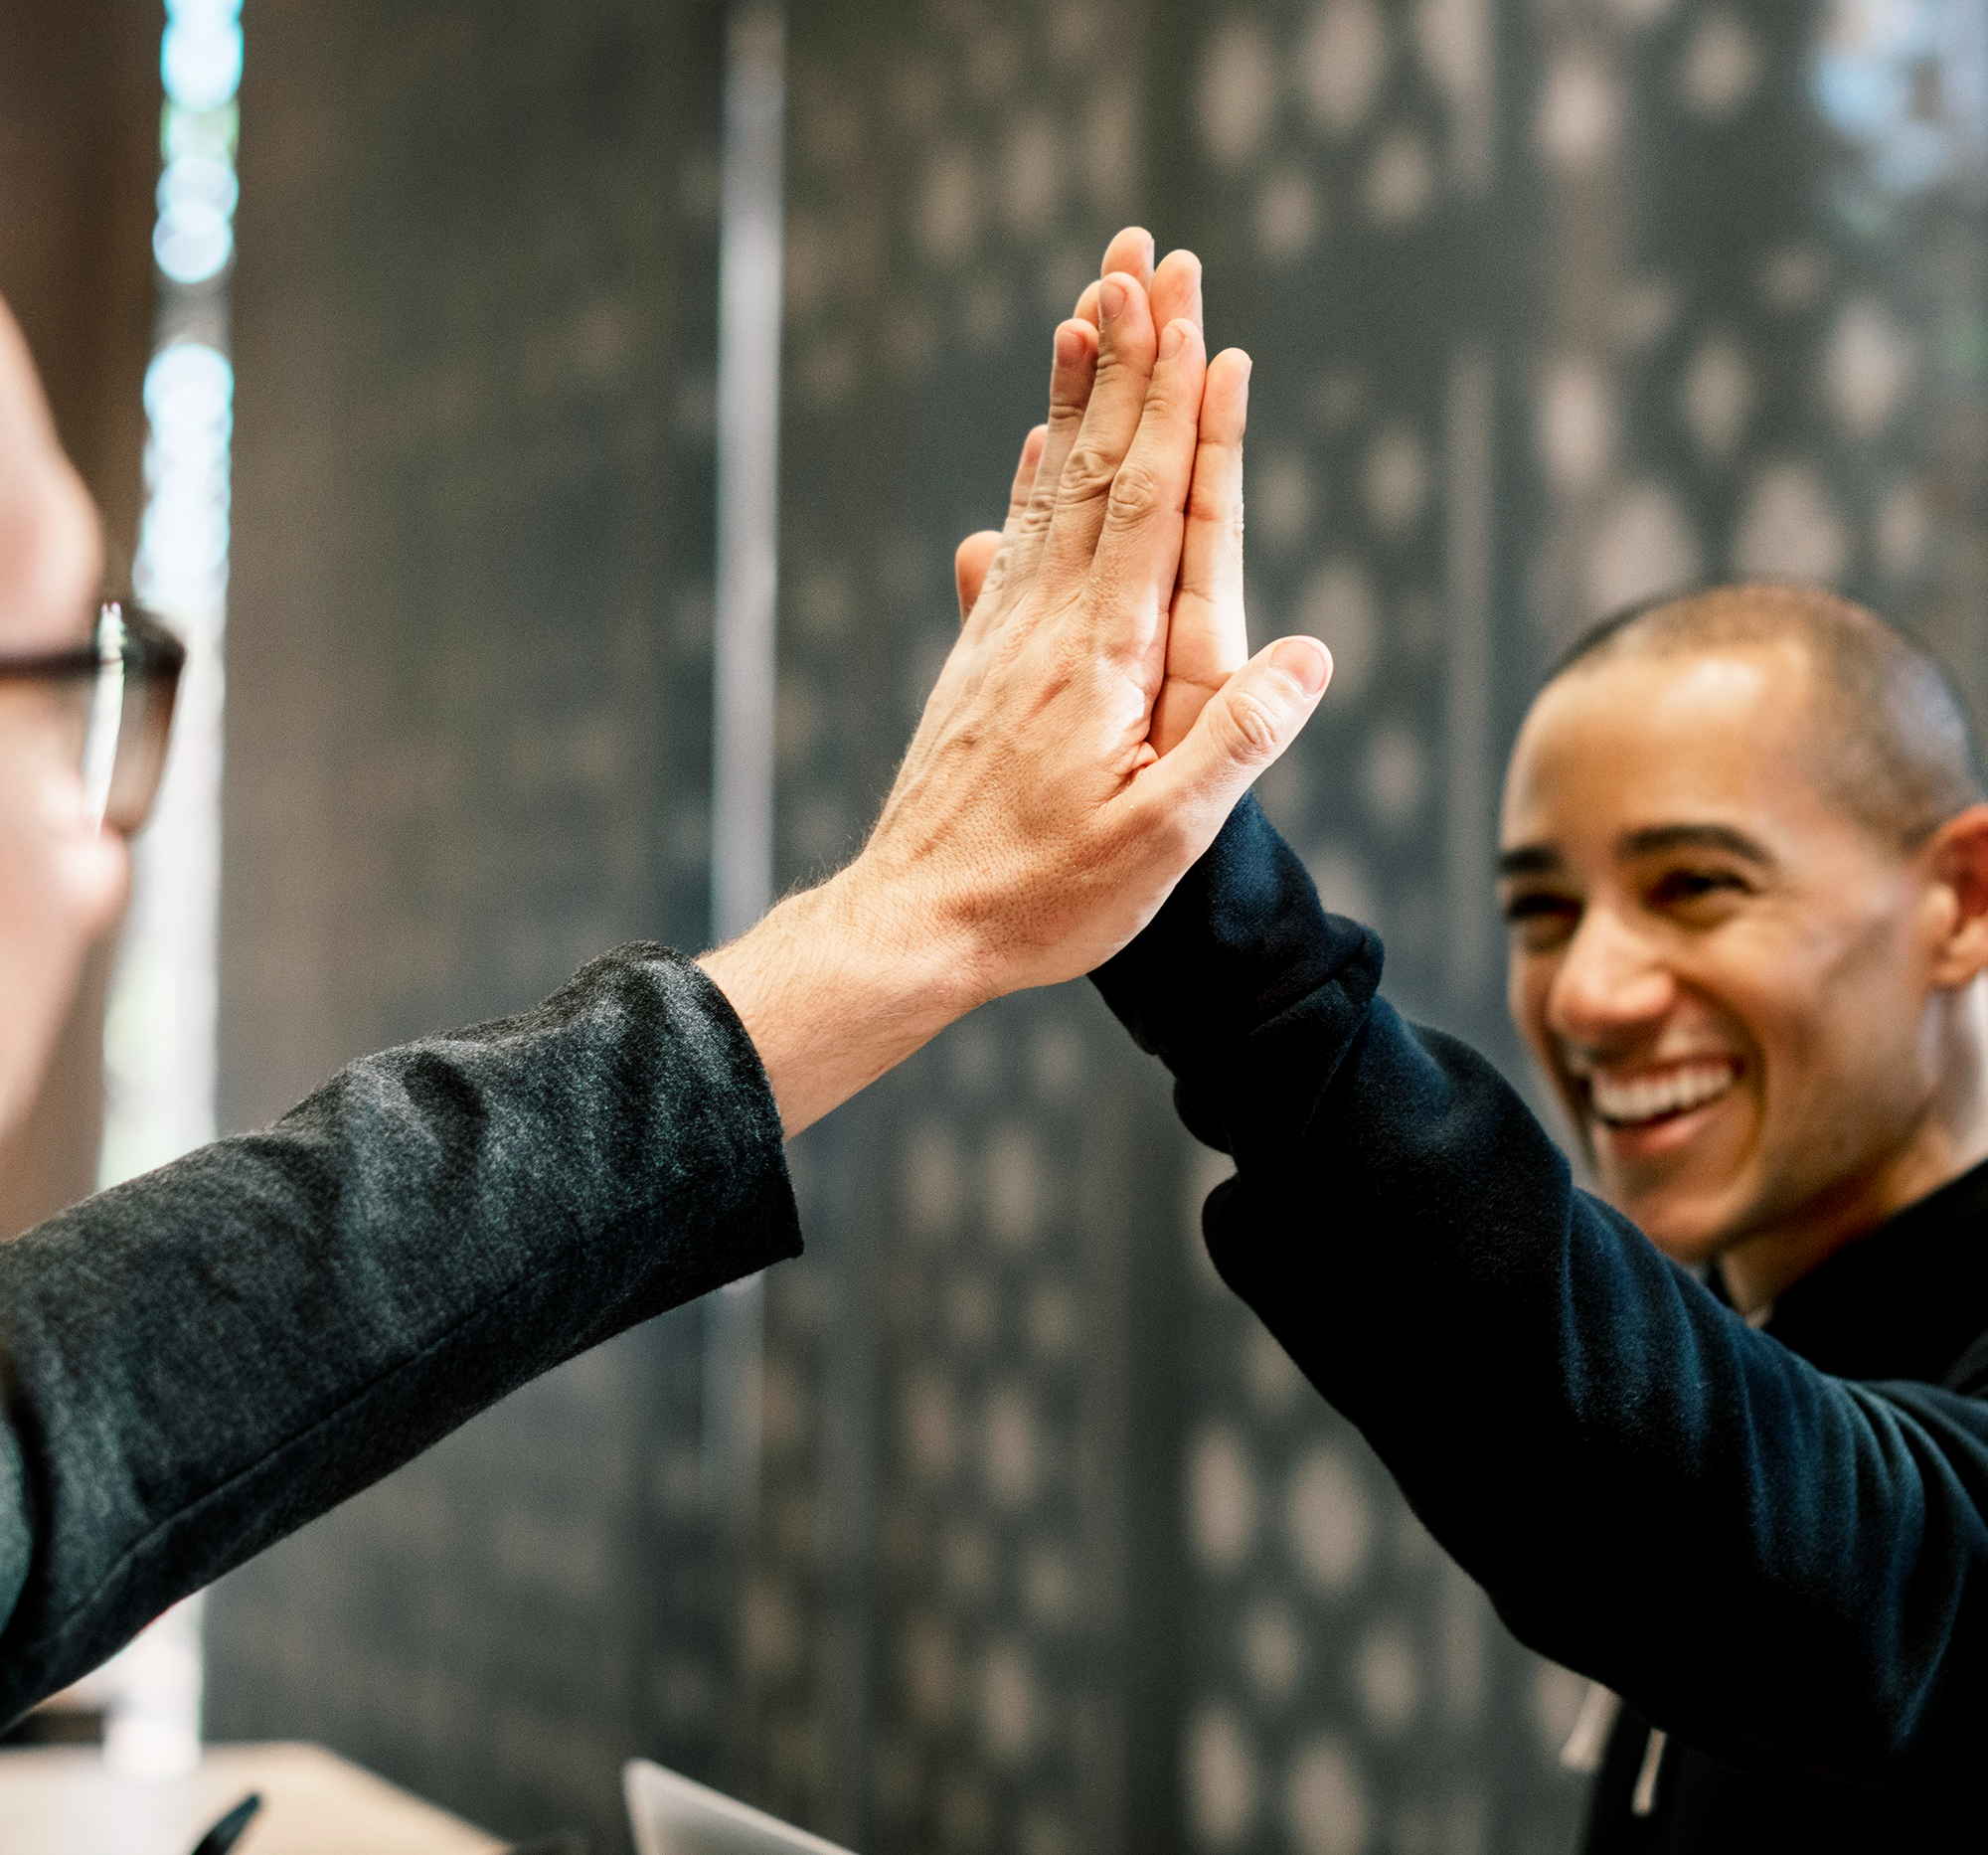 Colleagues giving each other a high five | Source: Freepik